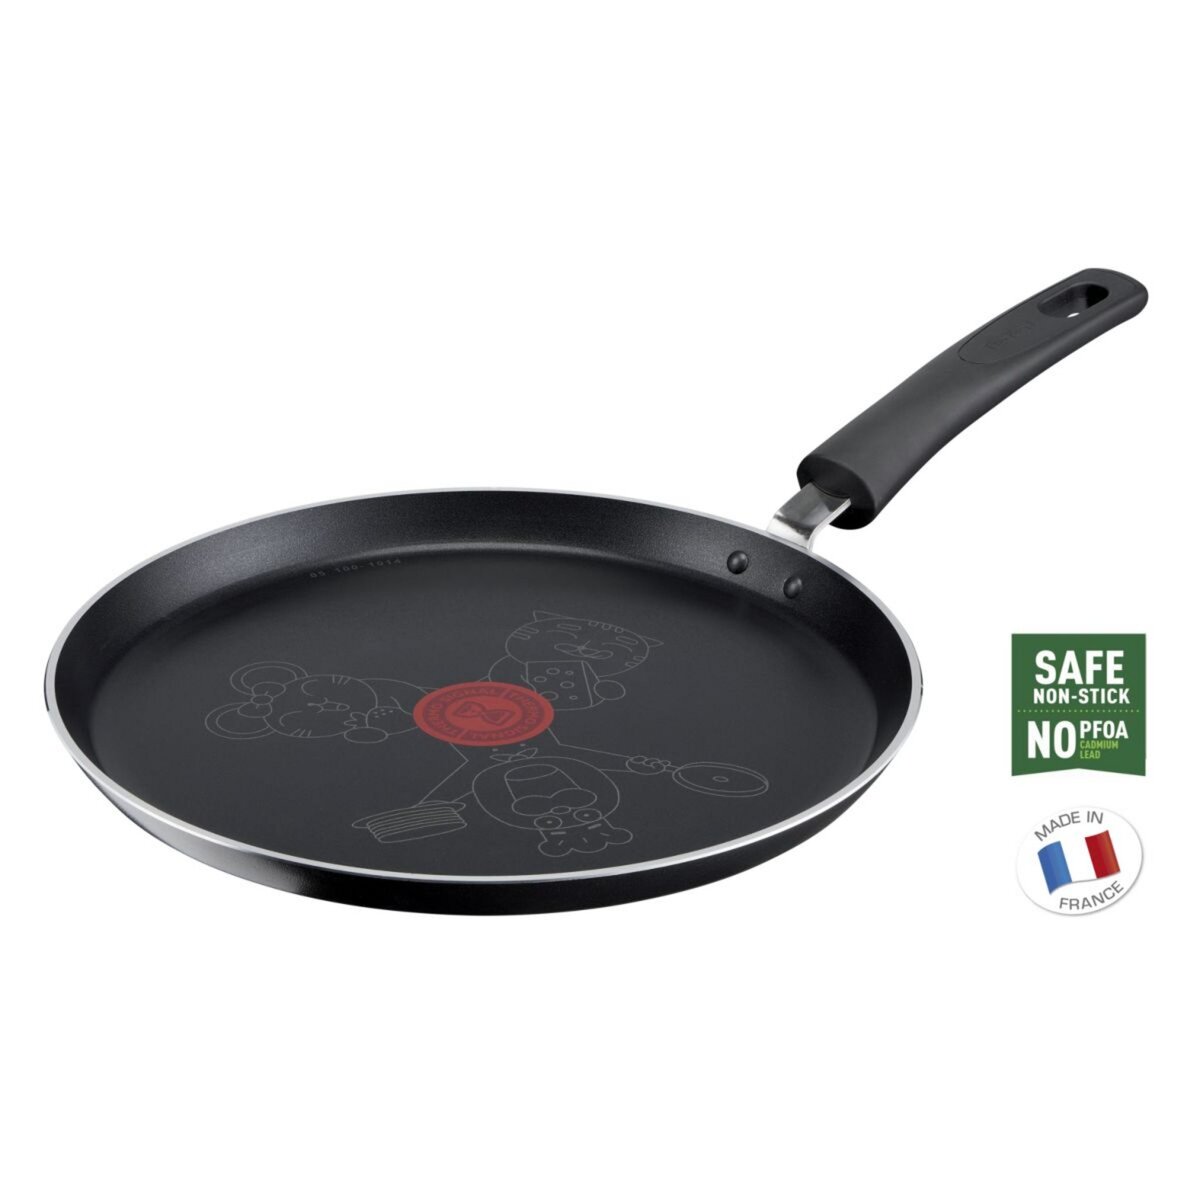 Crepiere induction tefal - Cdiscount